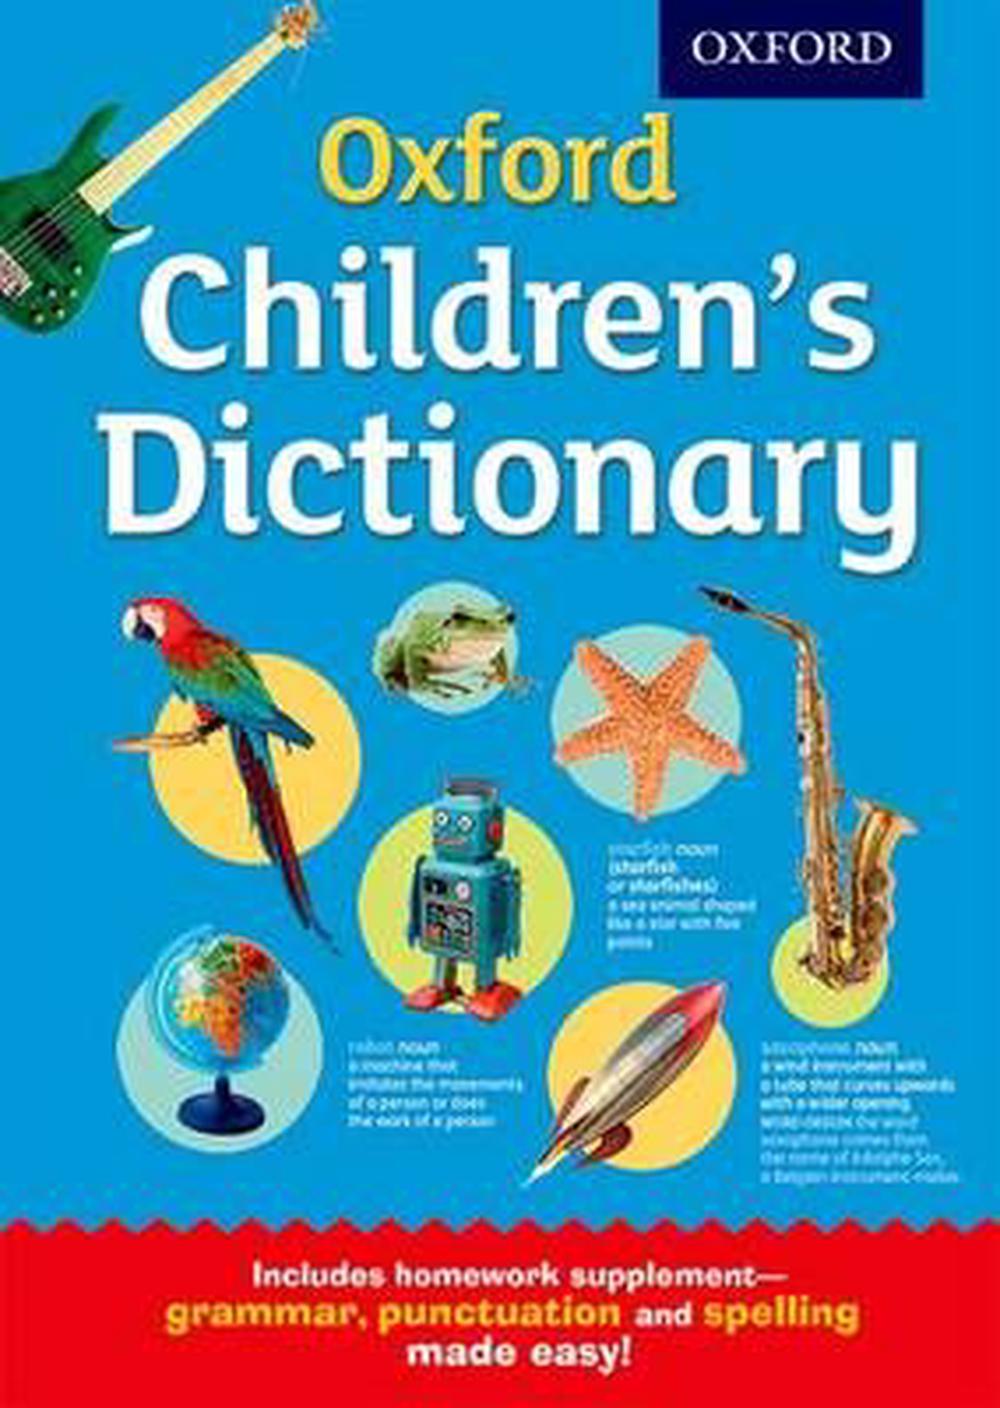 oxford picture dictionary online free